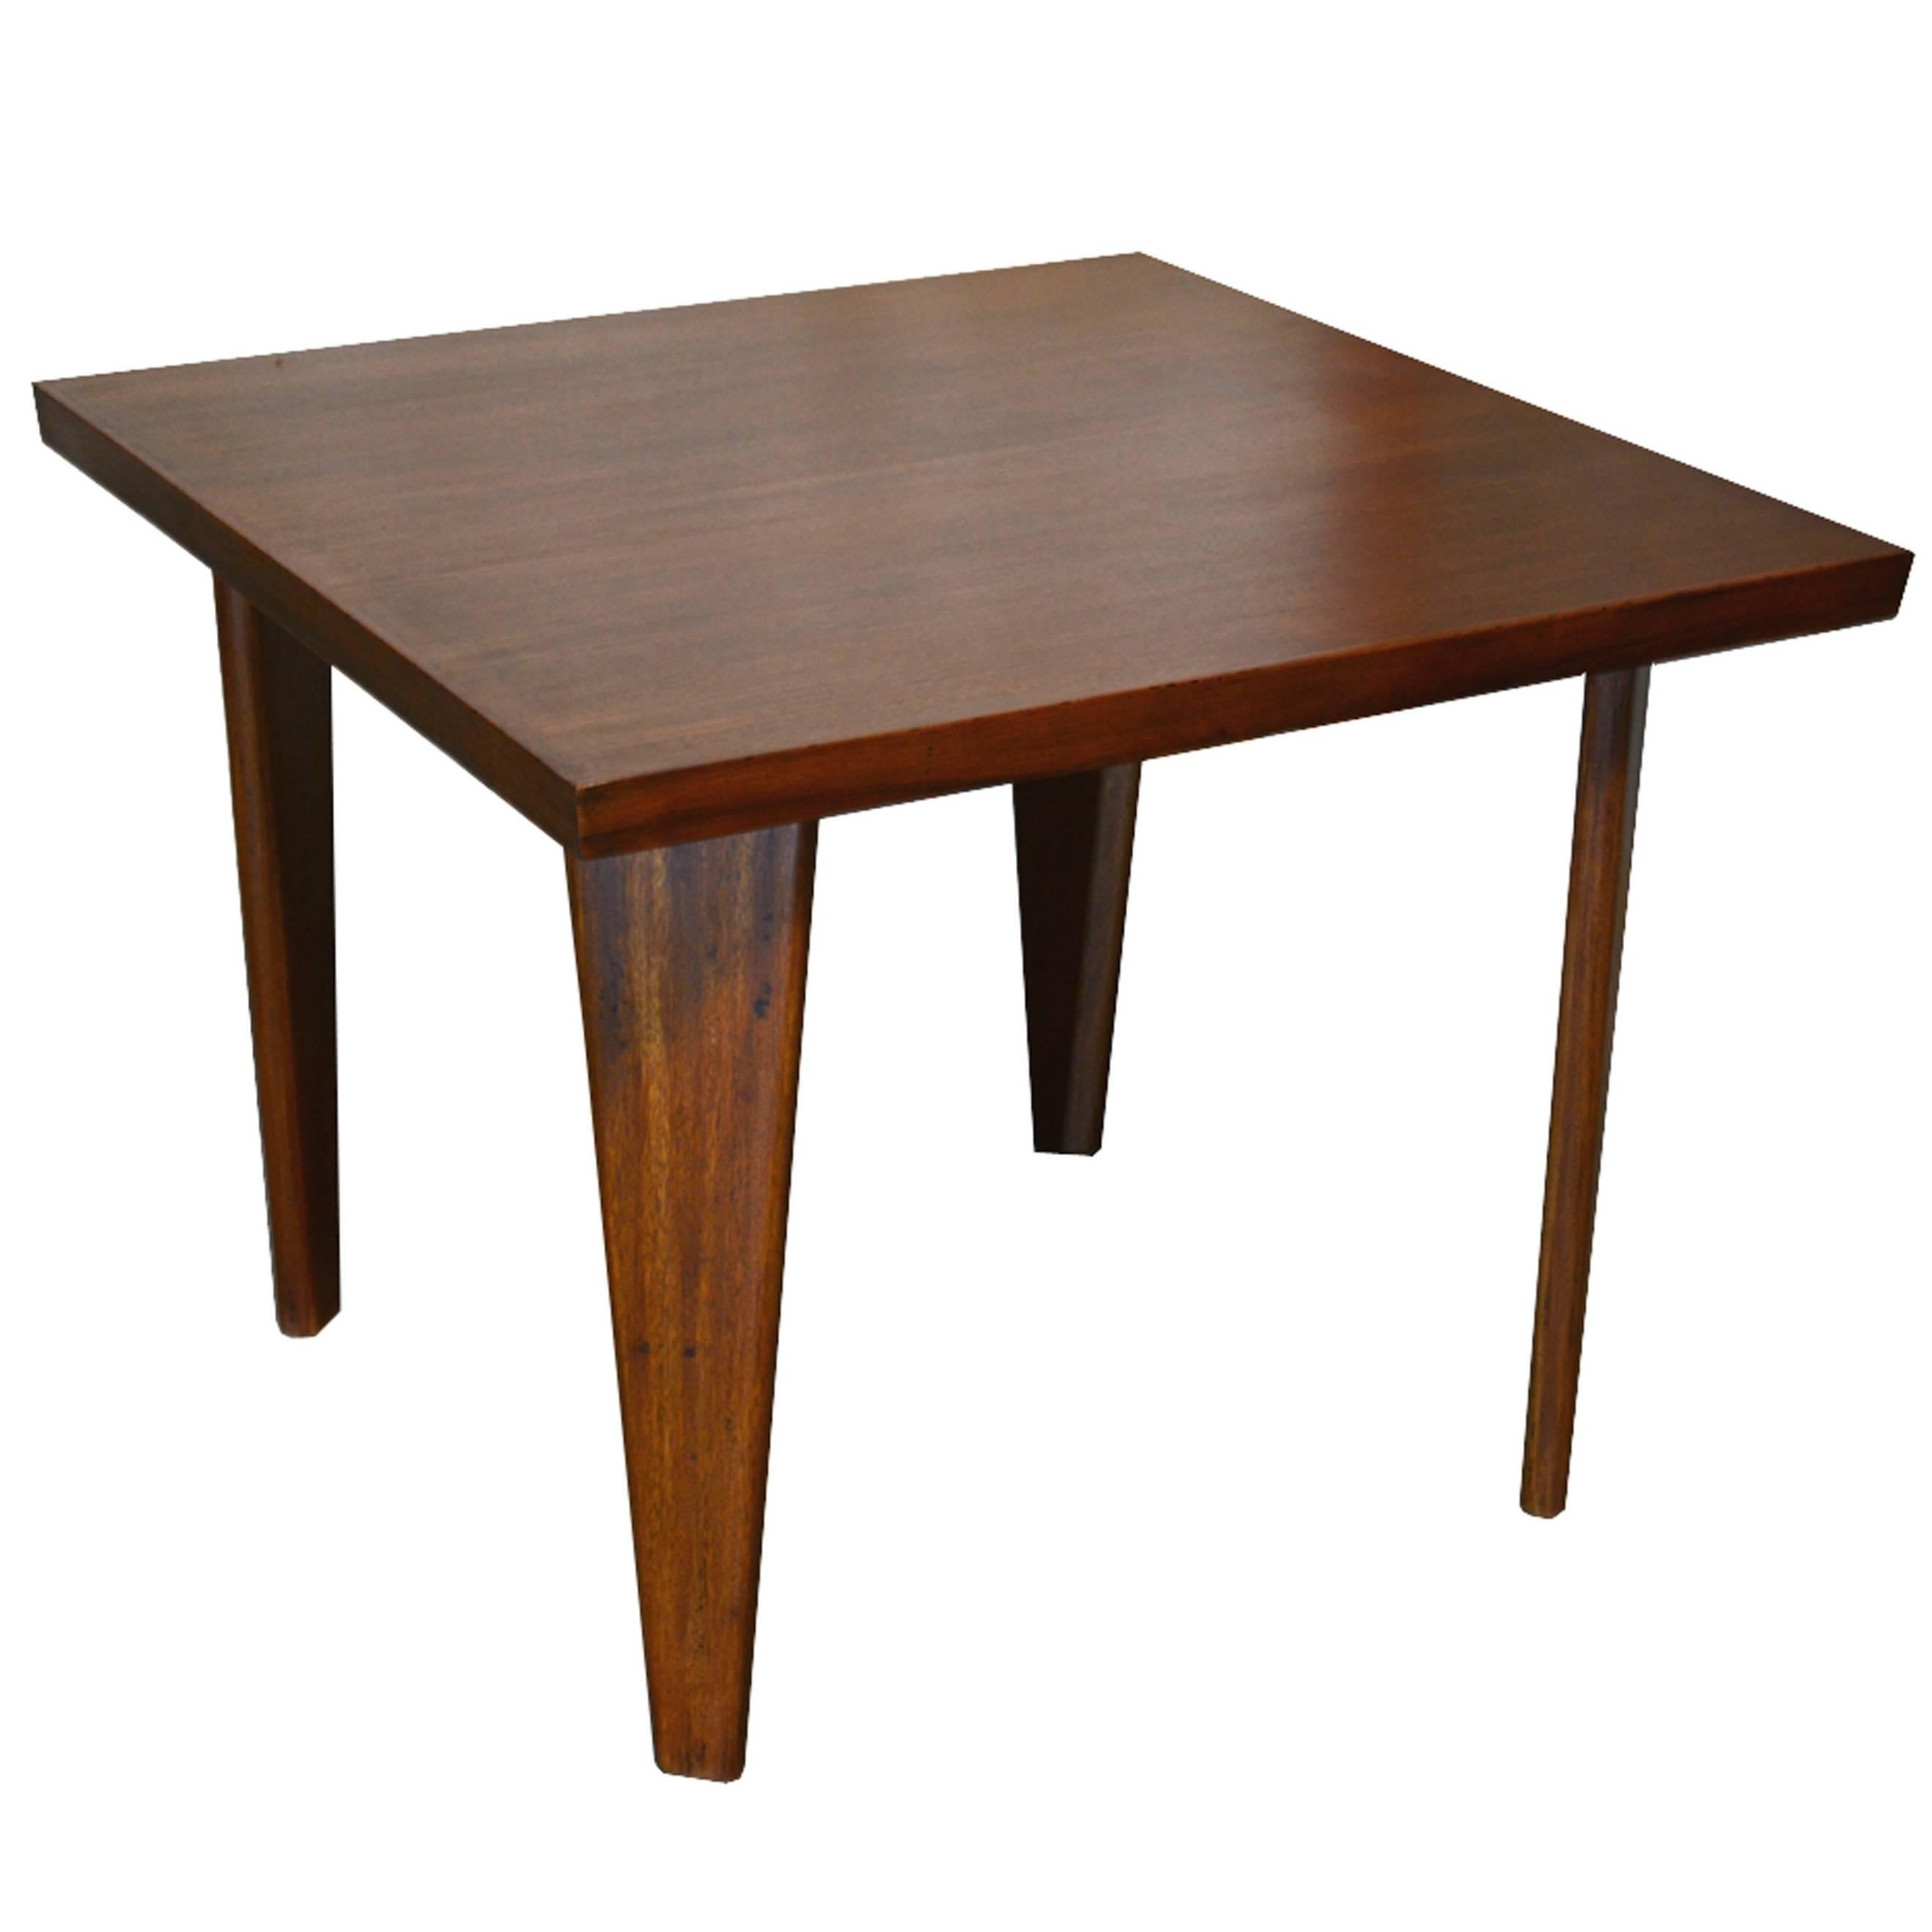 Pierre Jeanneret, Square Table for the Administration Building in Chandigarh For Sale